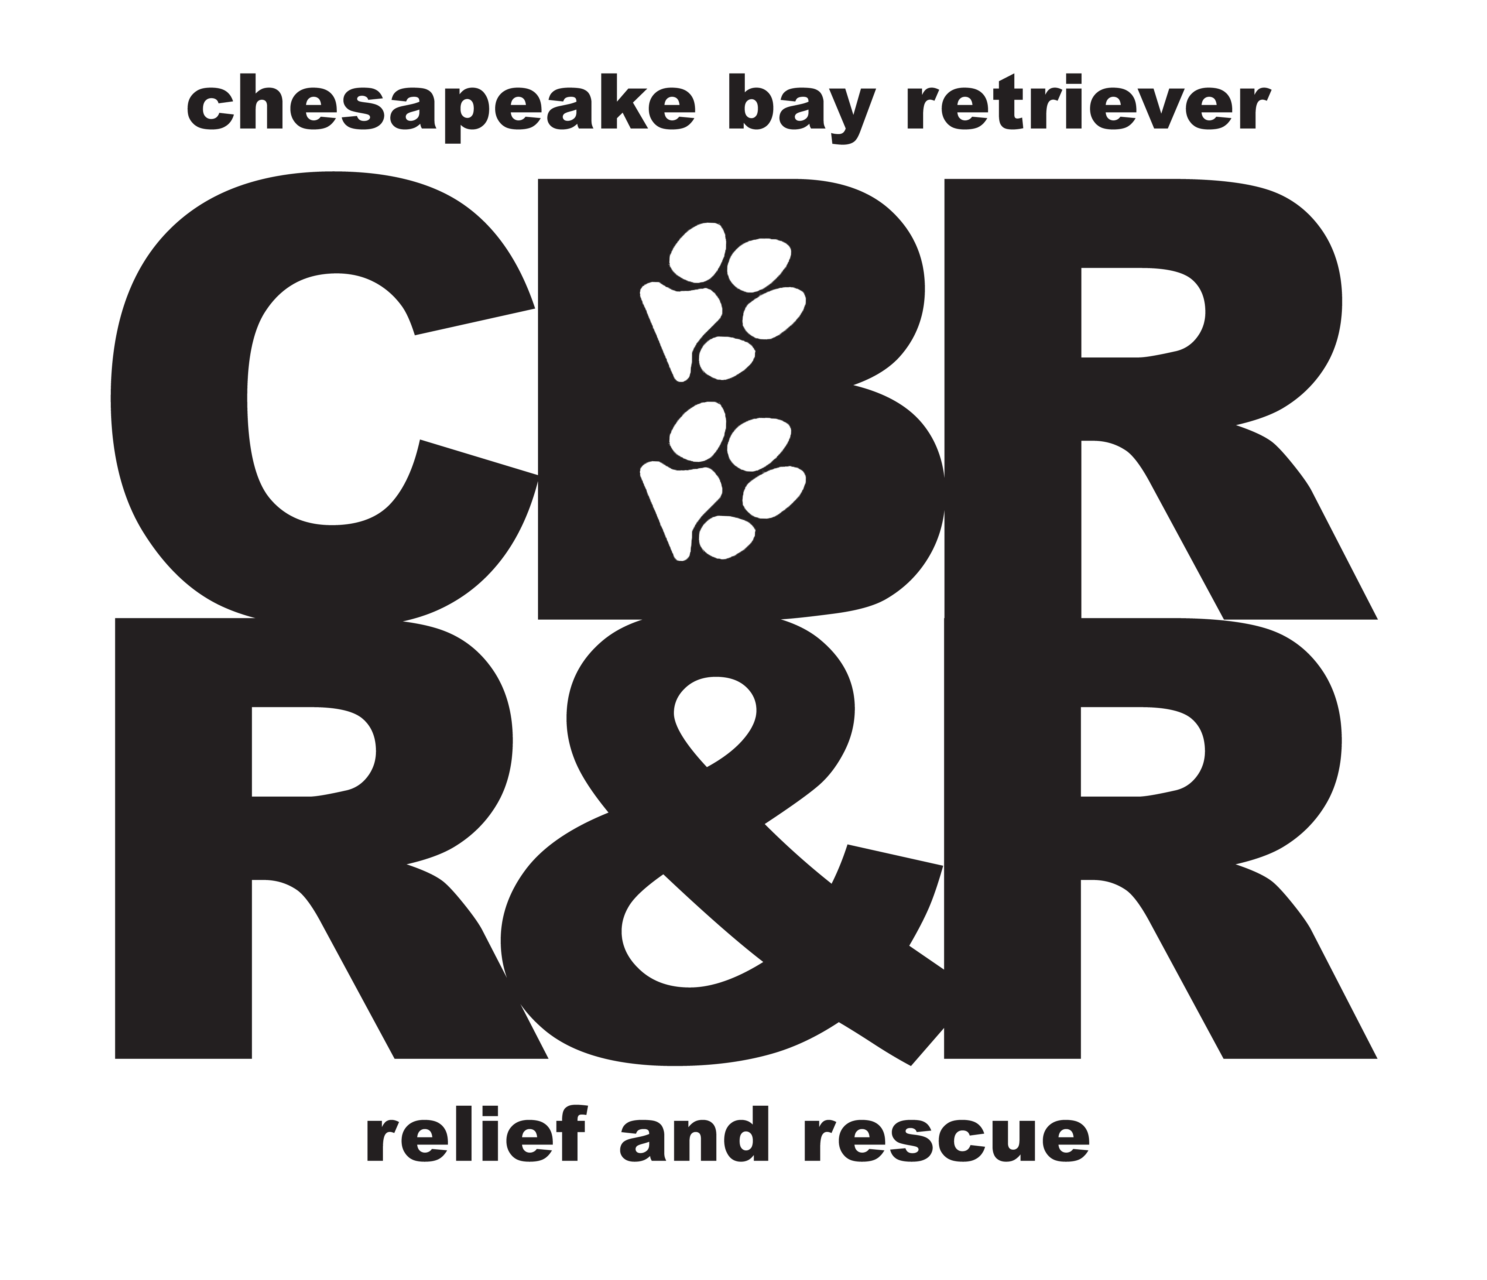 Chesapeake Bay Retriever Relief And Rescue - Midwest